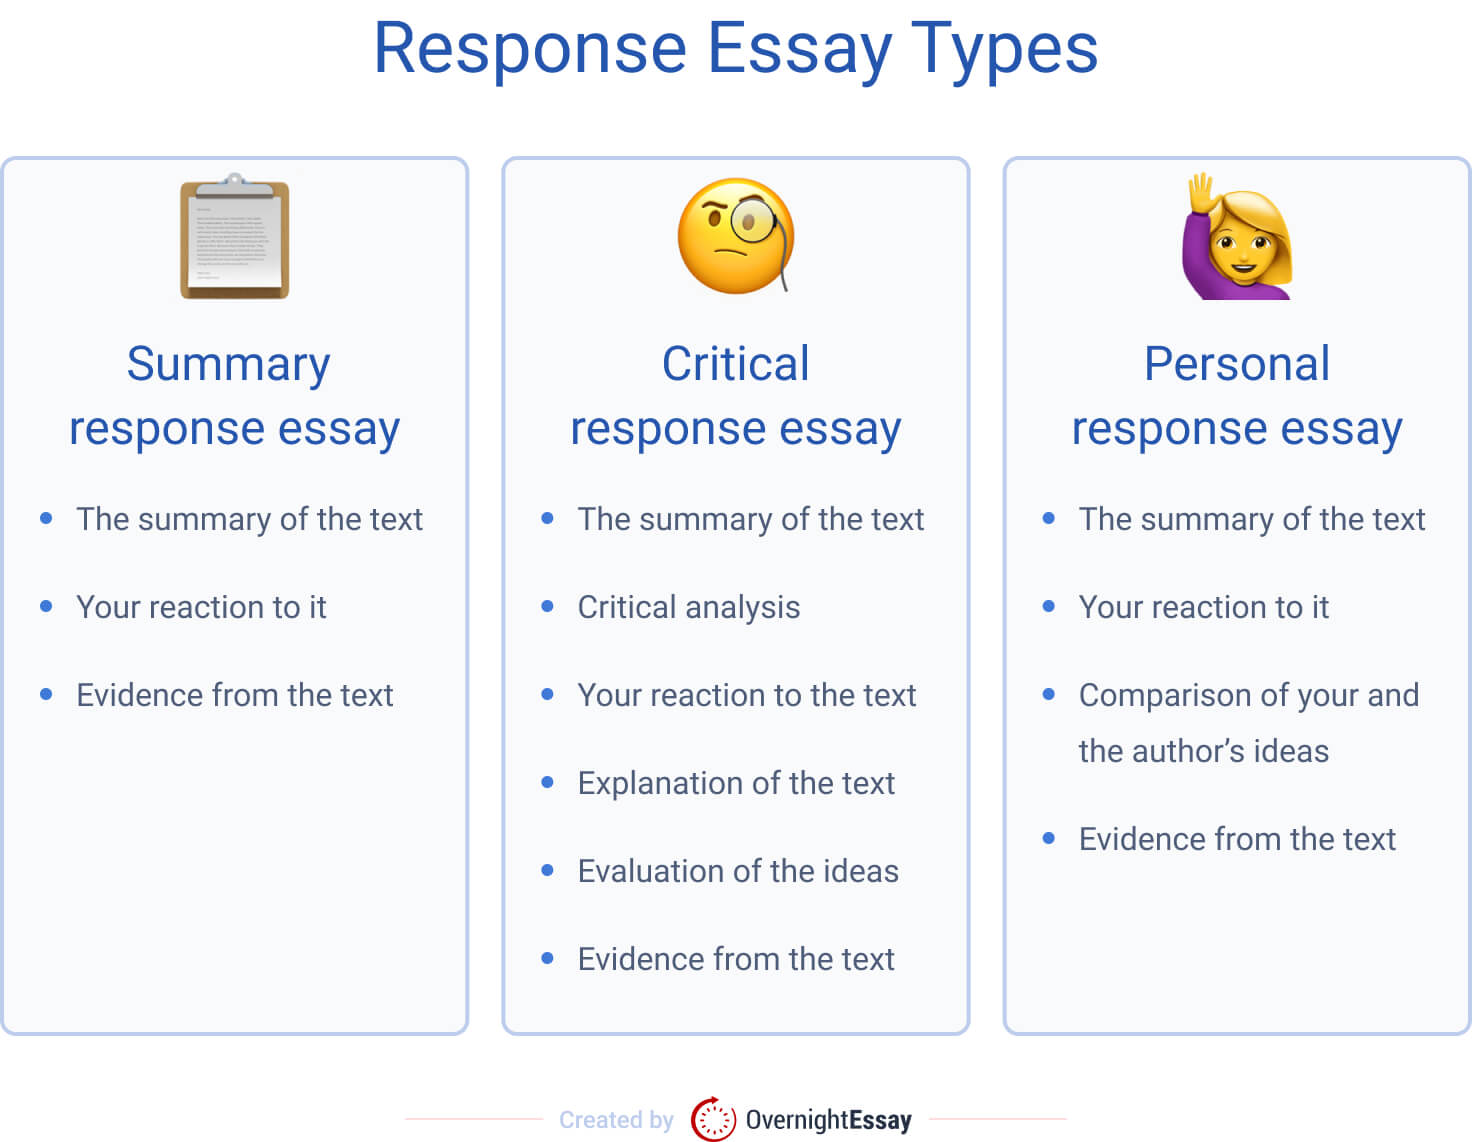 On the picture, the three types of response paper are compared: summary response essay, critical response essay, and personal response essay.